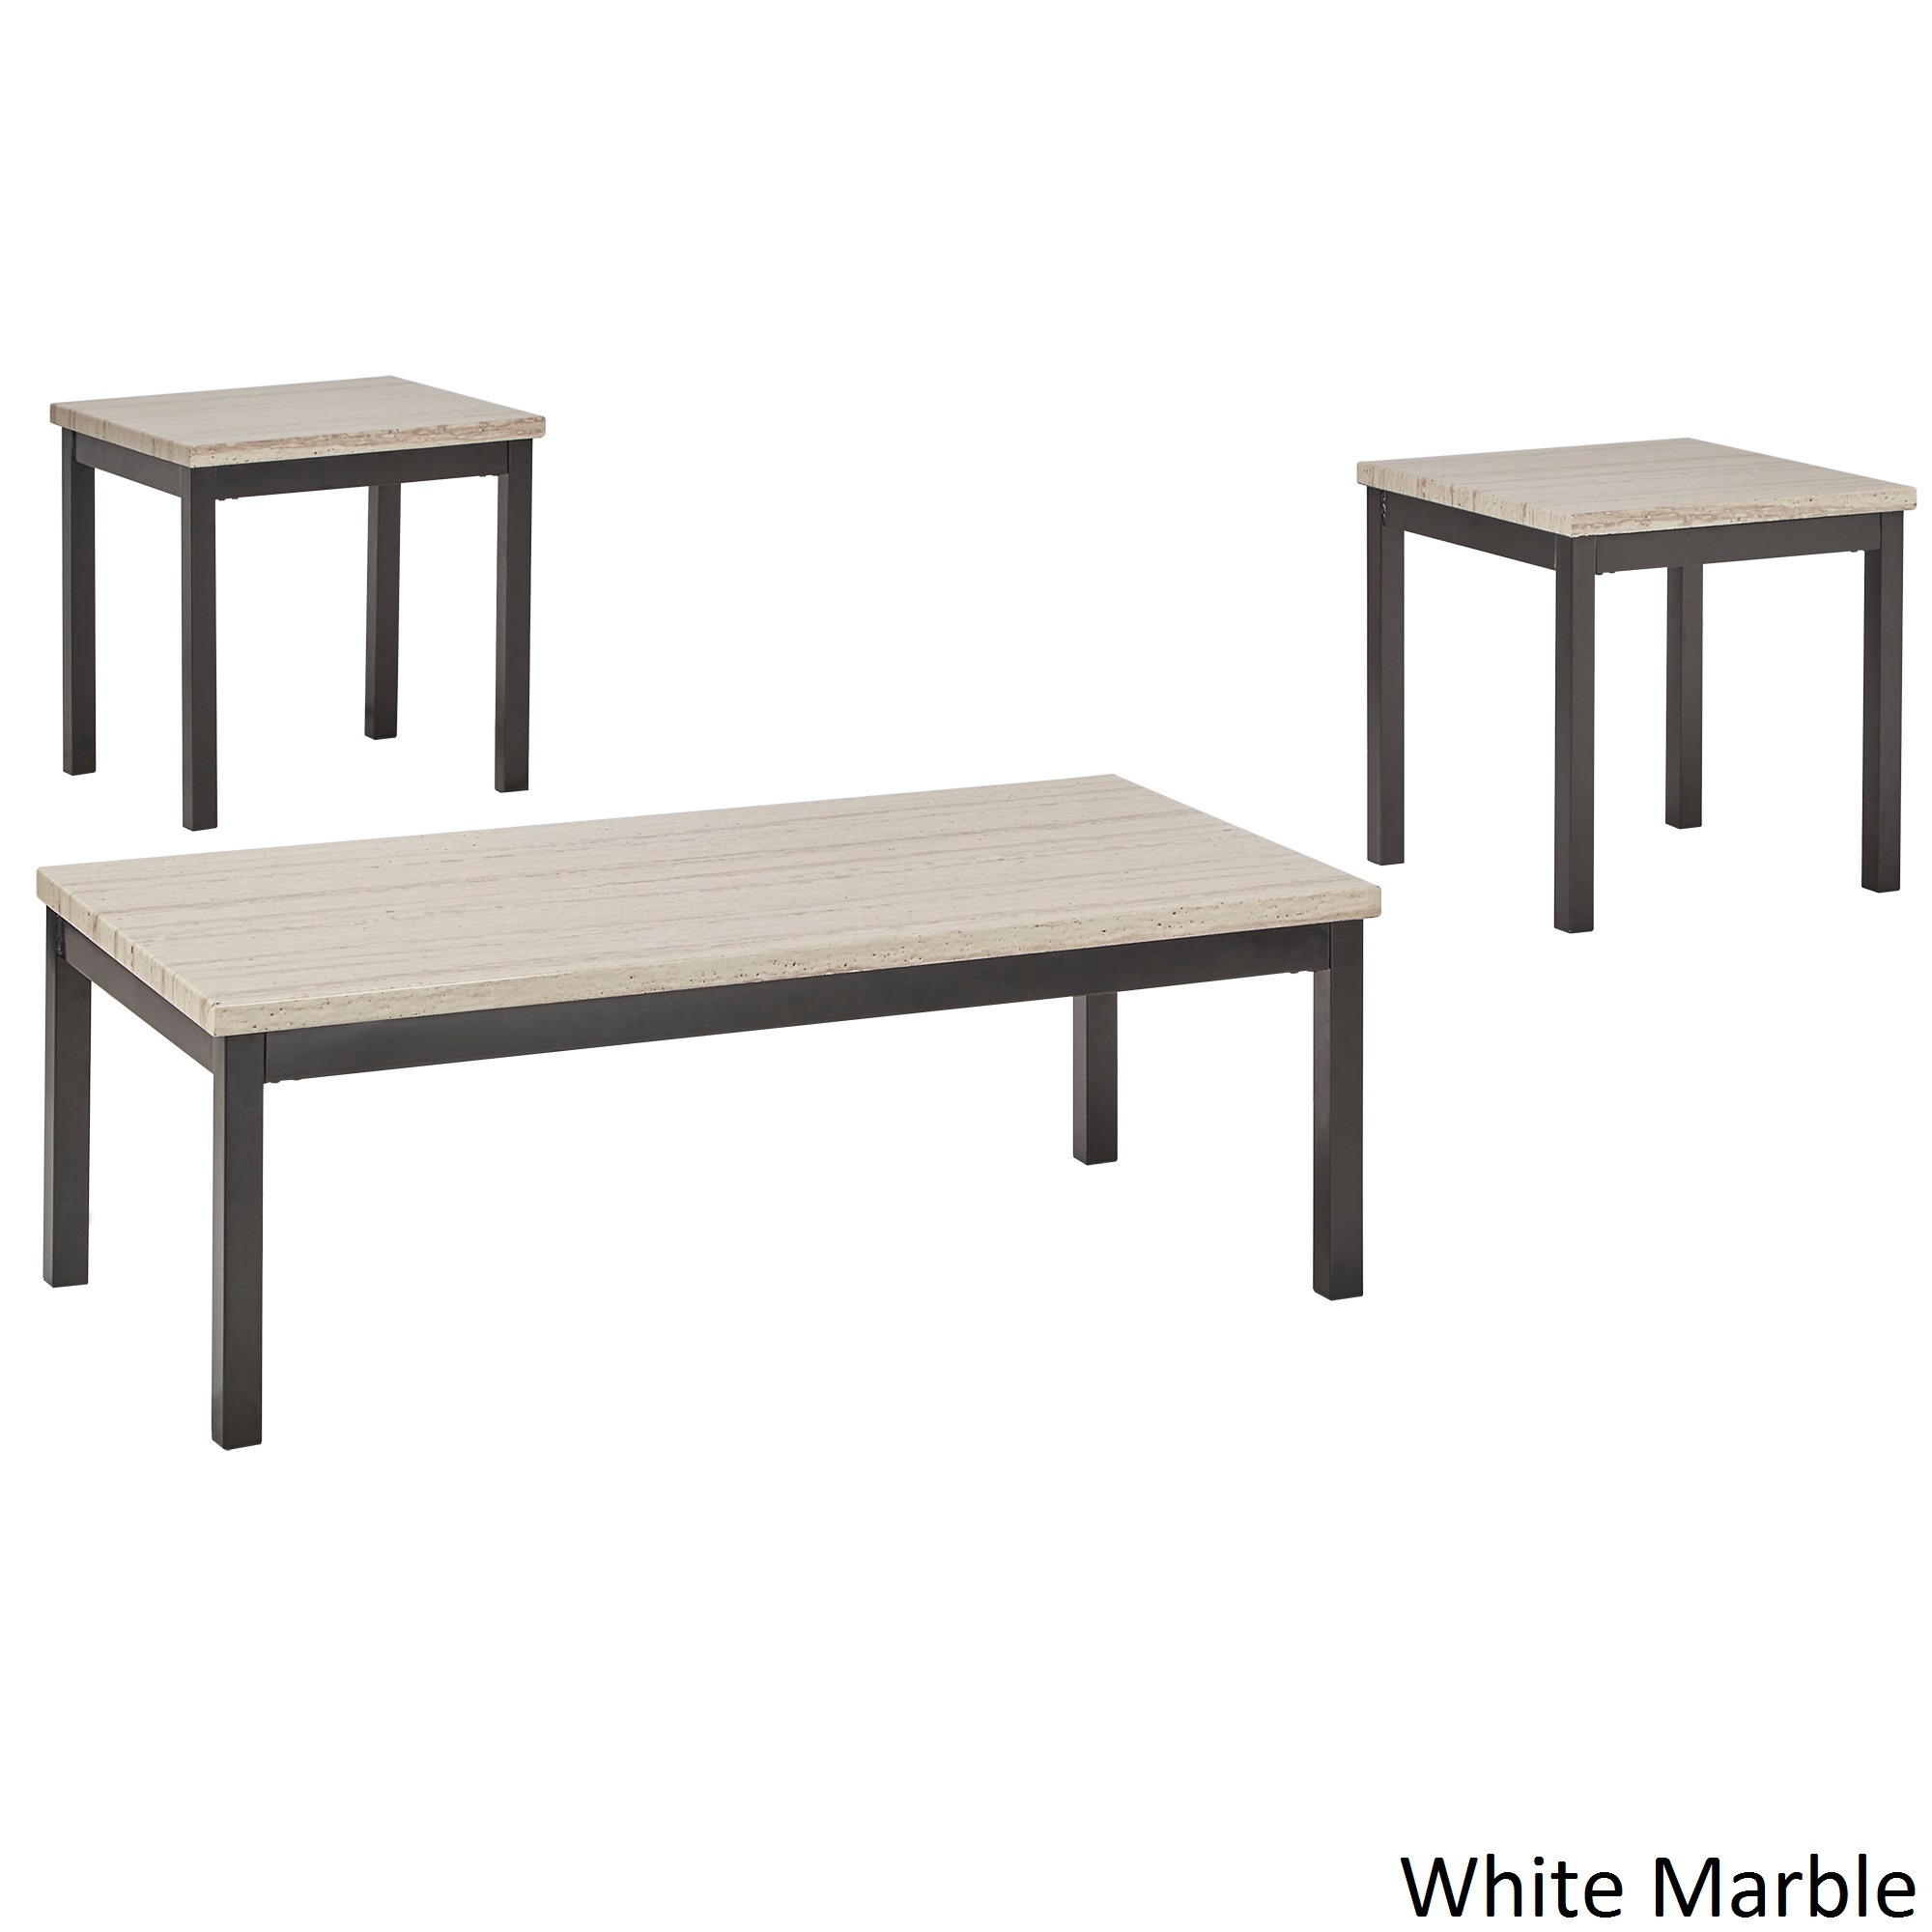 darcy piece metal and faux marble accent table set inspire bold free shipping today small kitchen chairs old wood end tables white oak side farmhouse nesting console contemporary